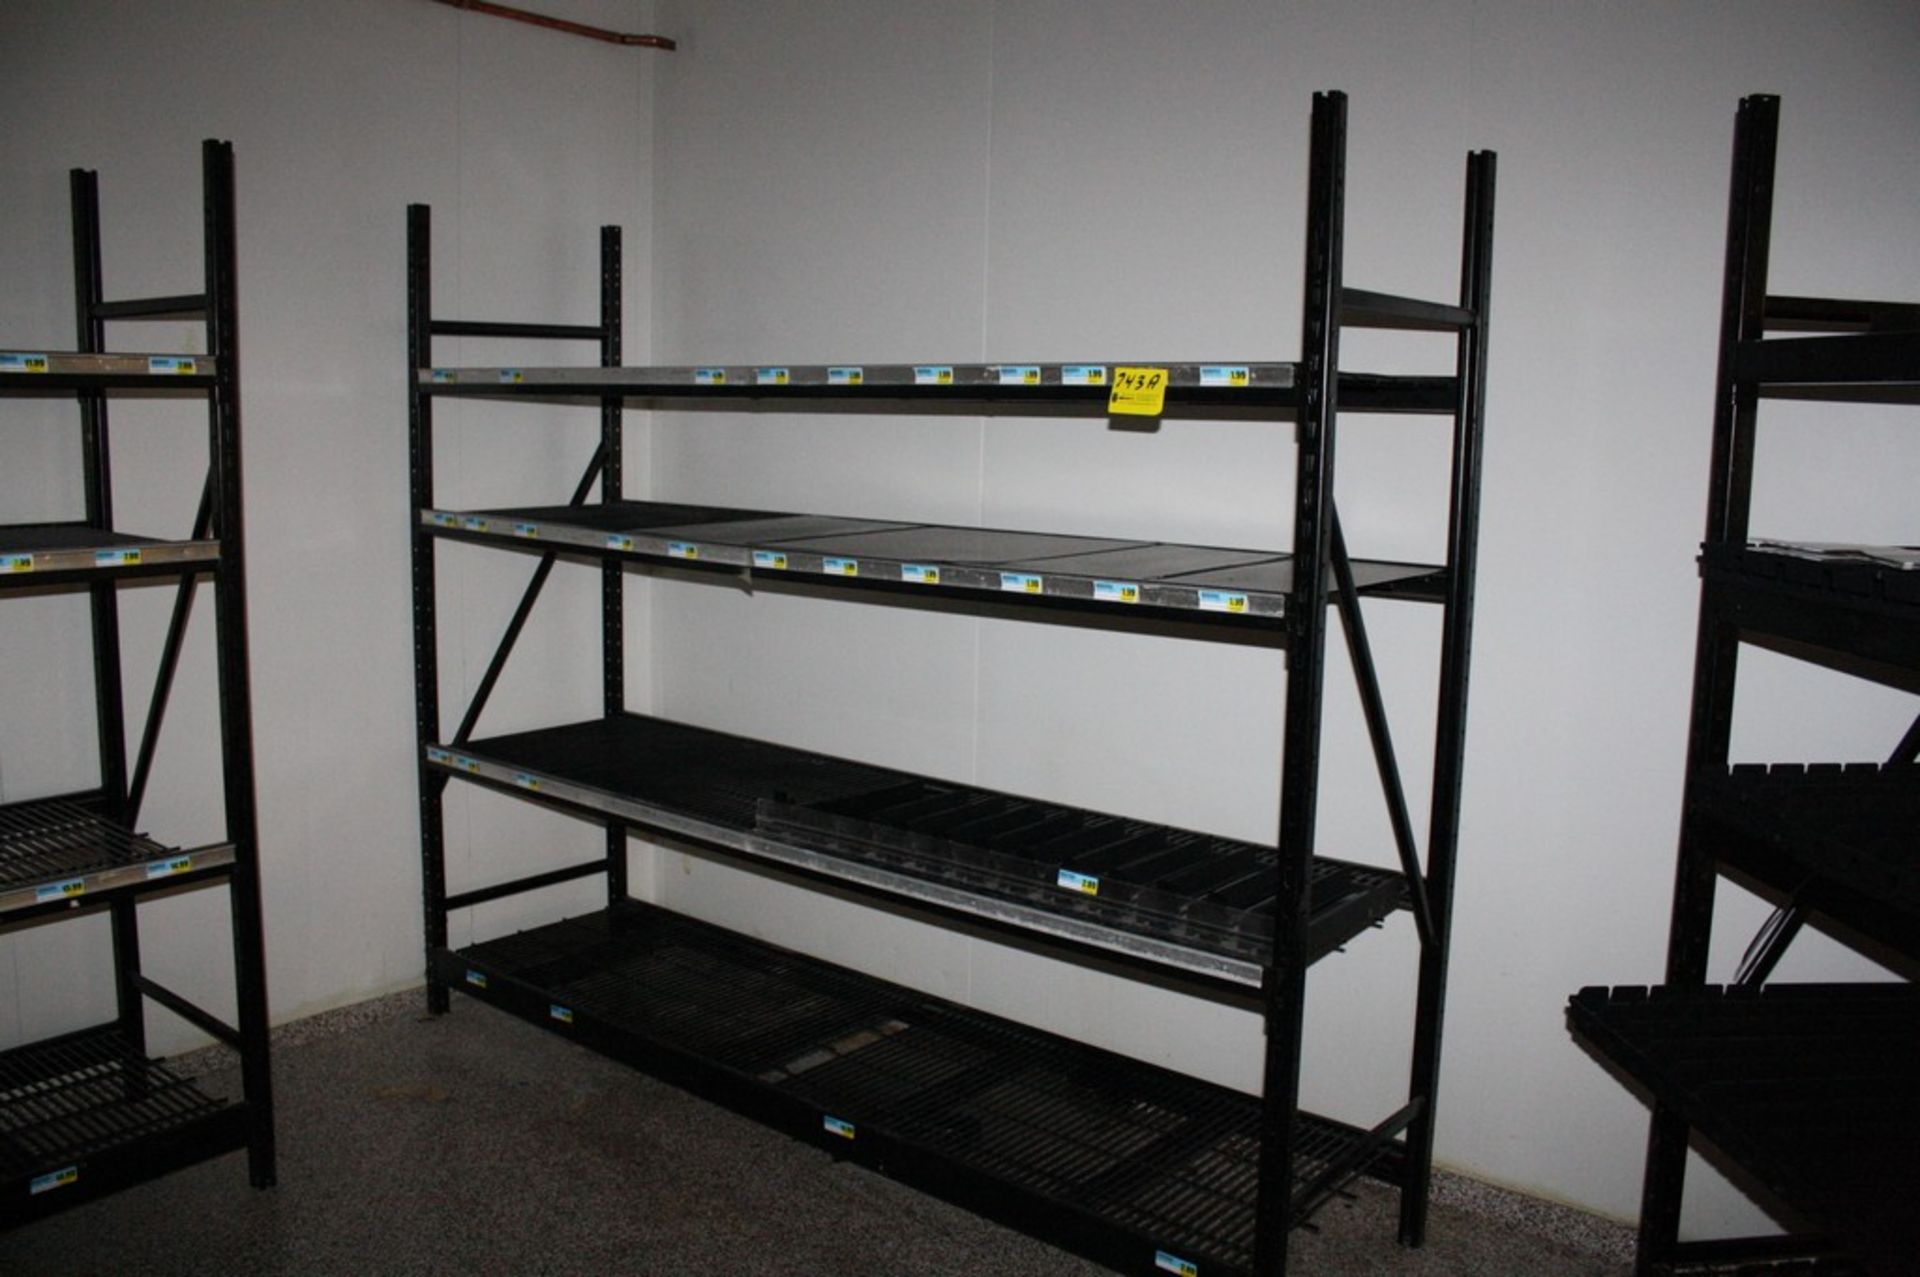 SECTION HEAVY DUTY ADJUSTABLE STEEL SHELVING: (2) 7' X 26'' UPRIGHTS, (8) 8' CROSSMEMBERS, AND